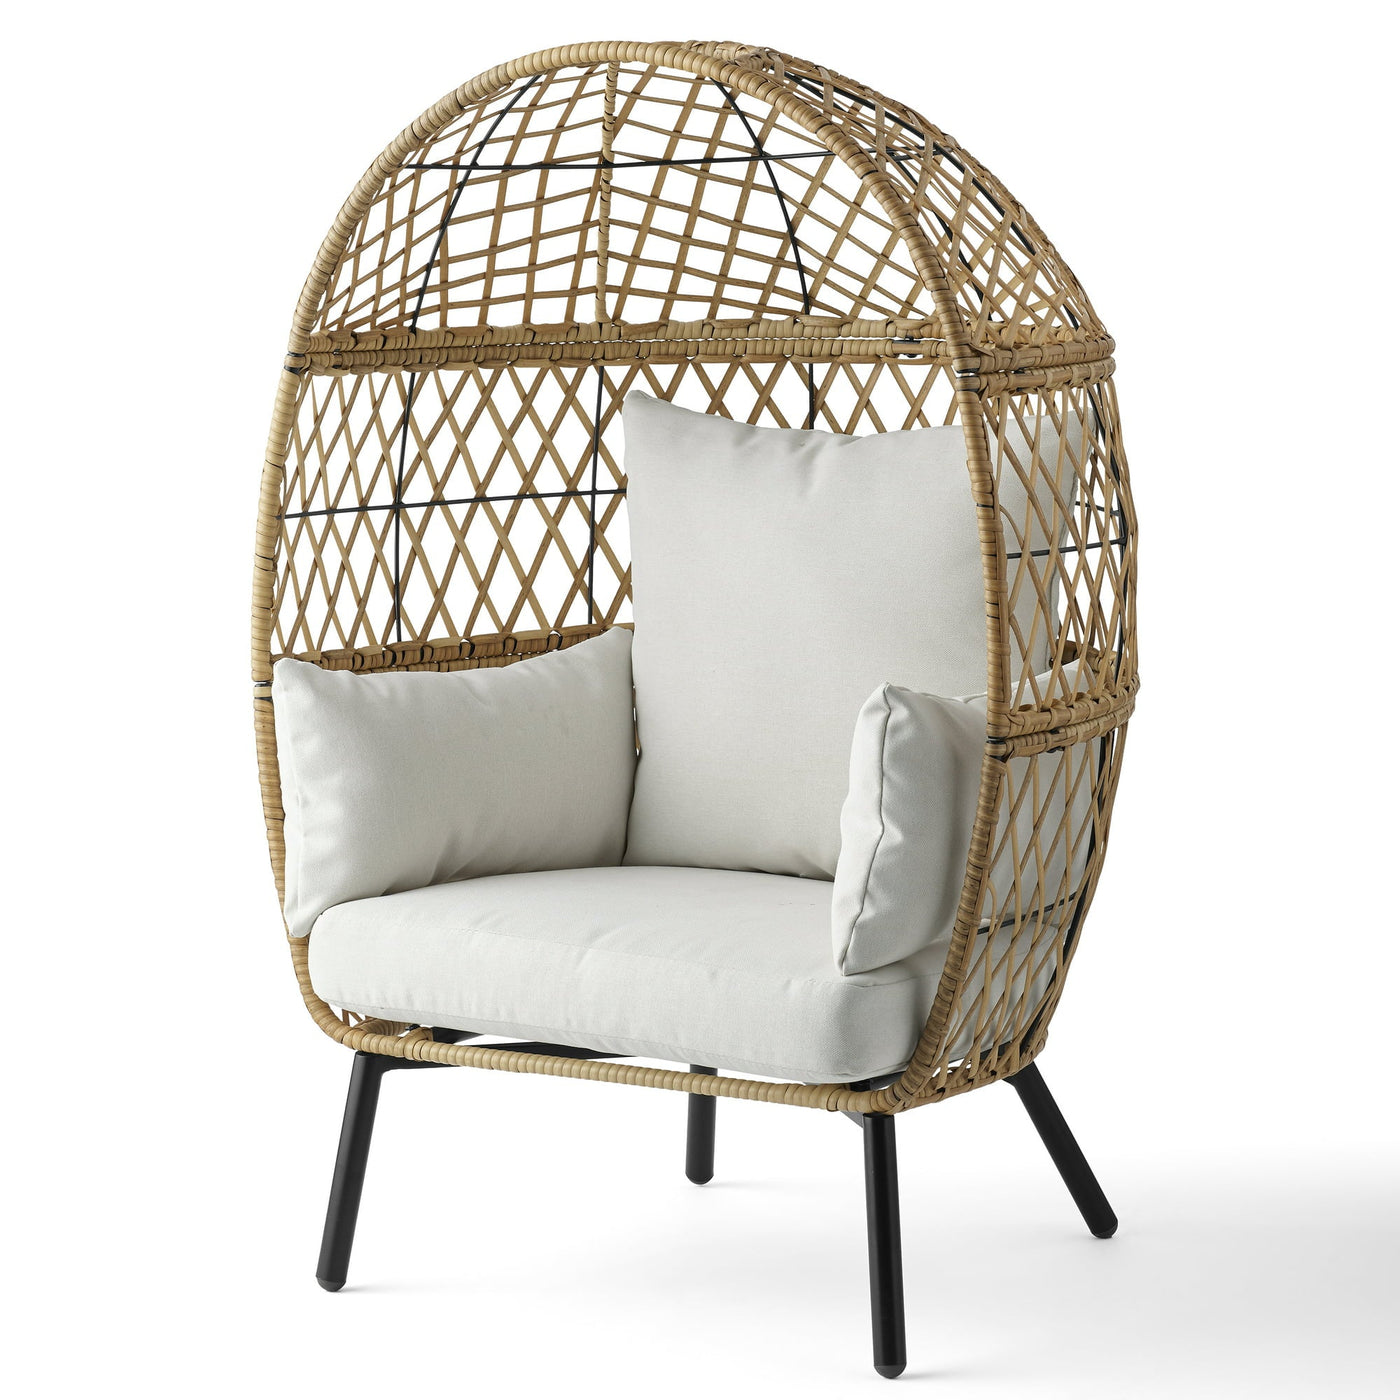 Handmade Beautifully Crafted Outdoor Wicker Stationary Egg Chair